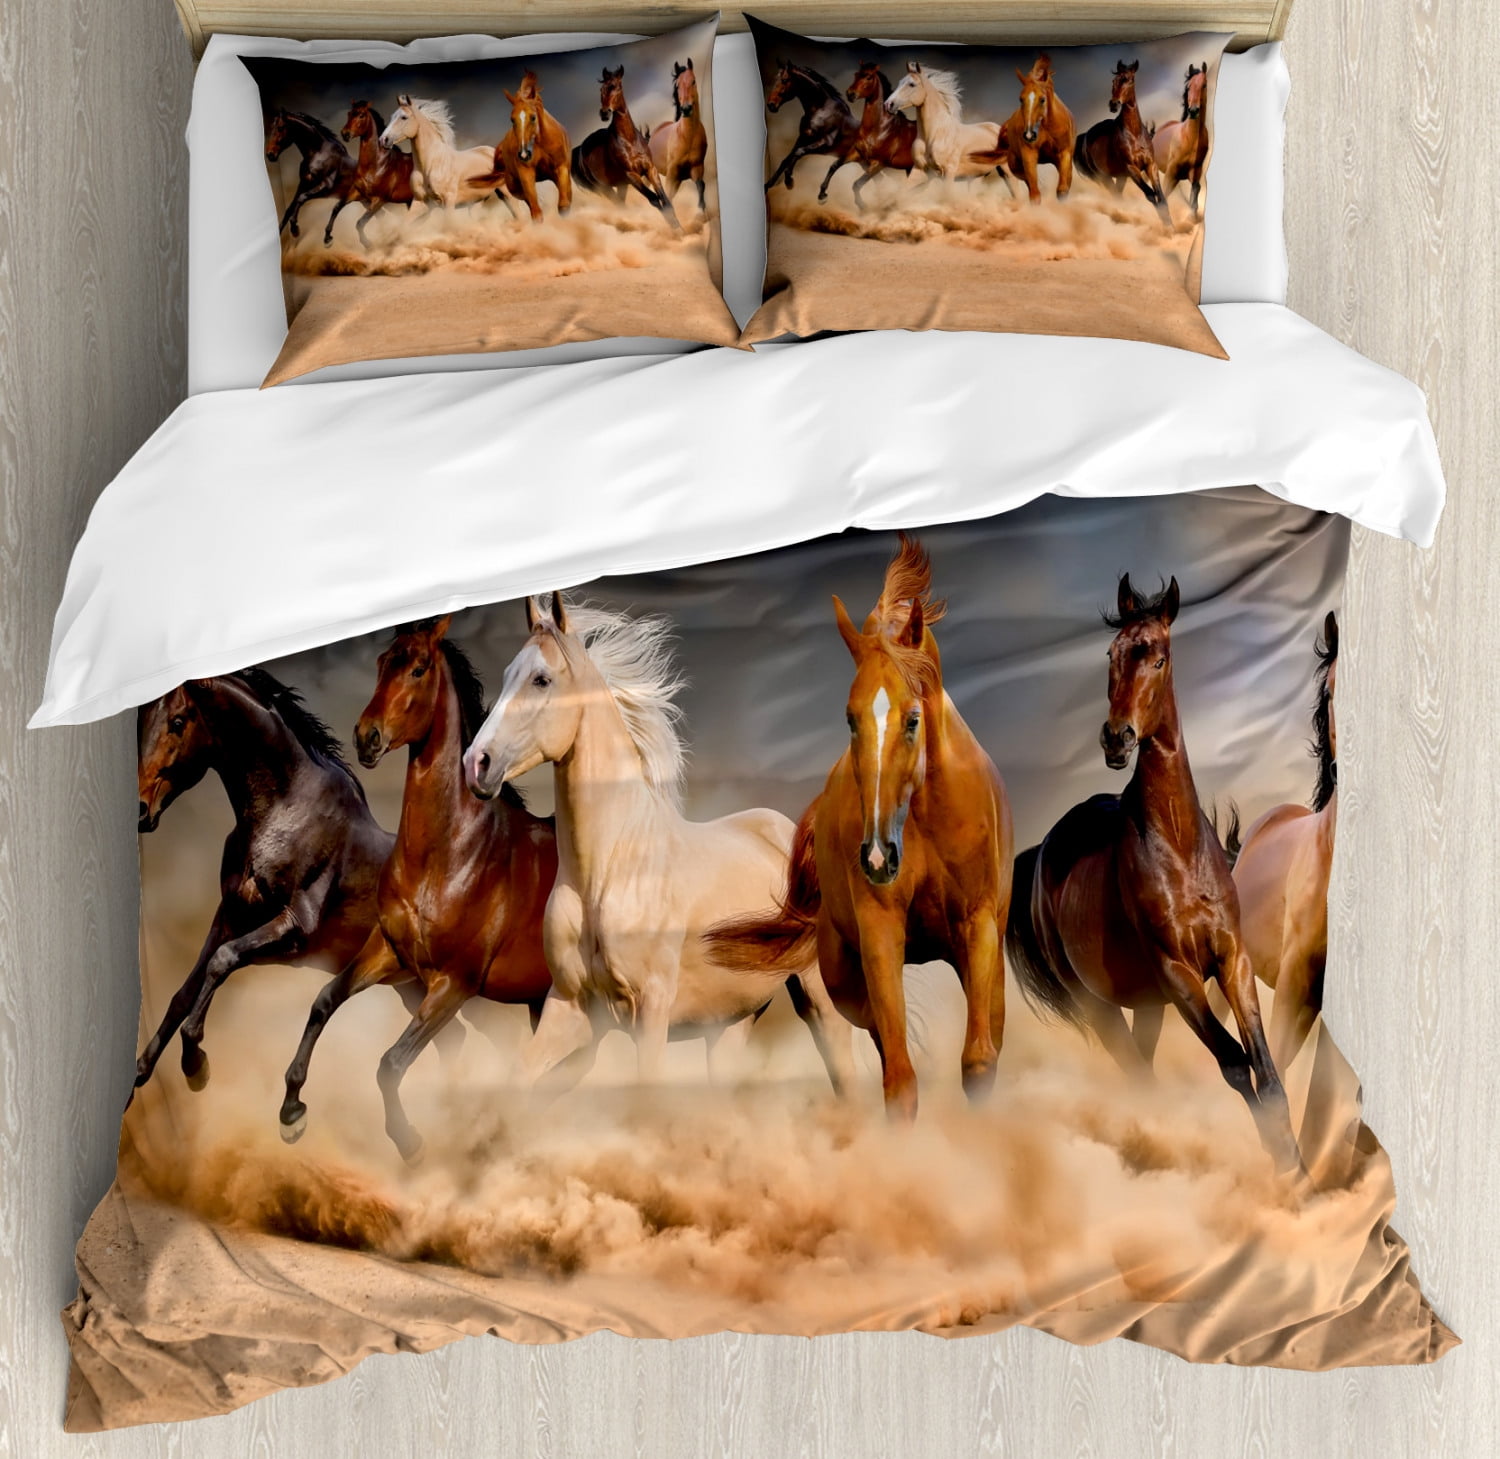 GALLOPING HORSE DOUBLE DUVET COVER SET AND PILLOWCASE BEDDING SET 